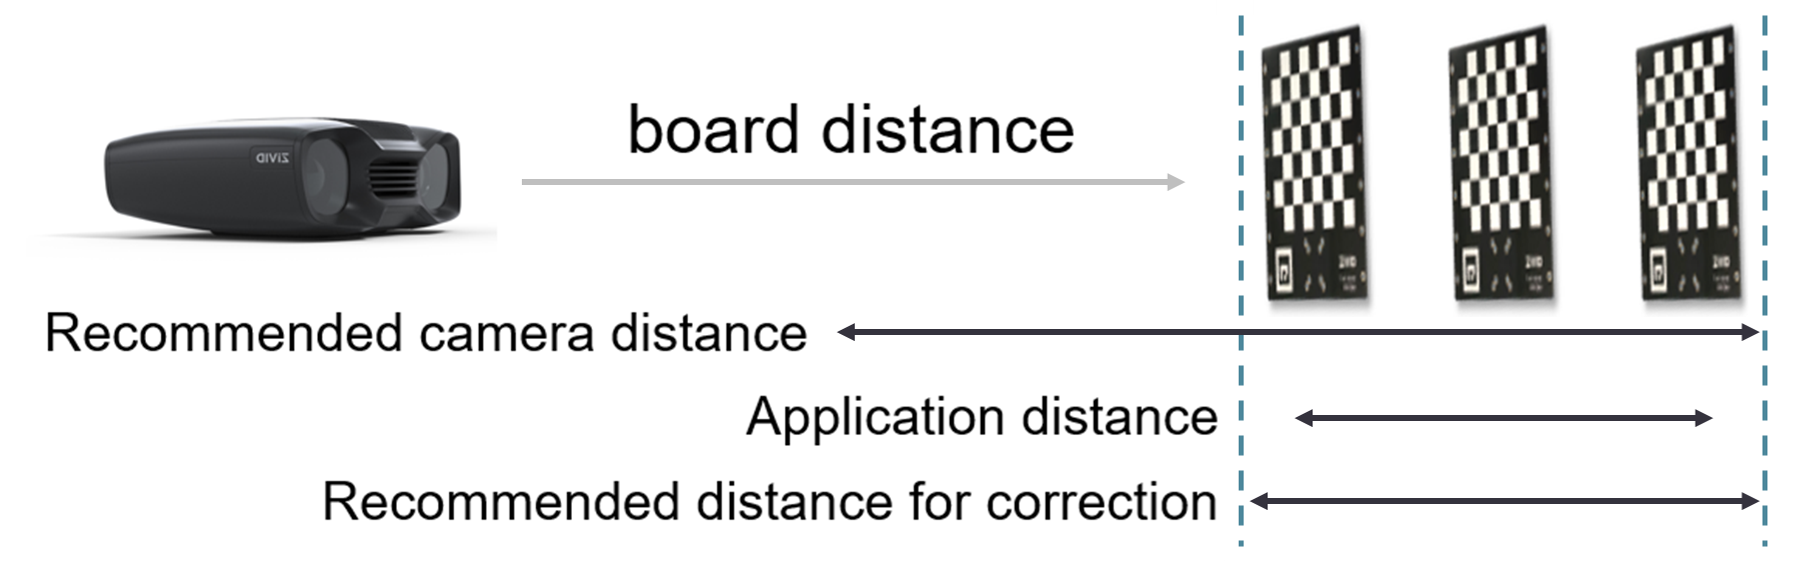 Image which shows how calibration boards should be positioned relative to the camera.